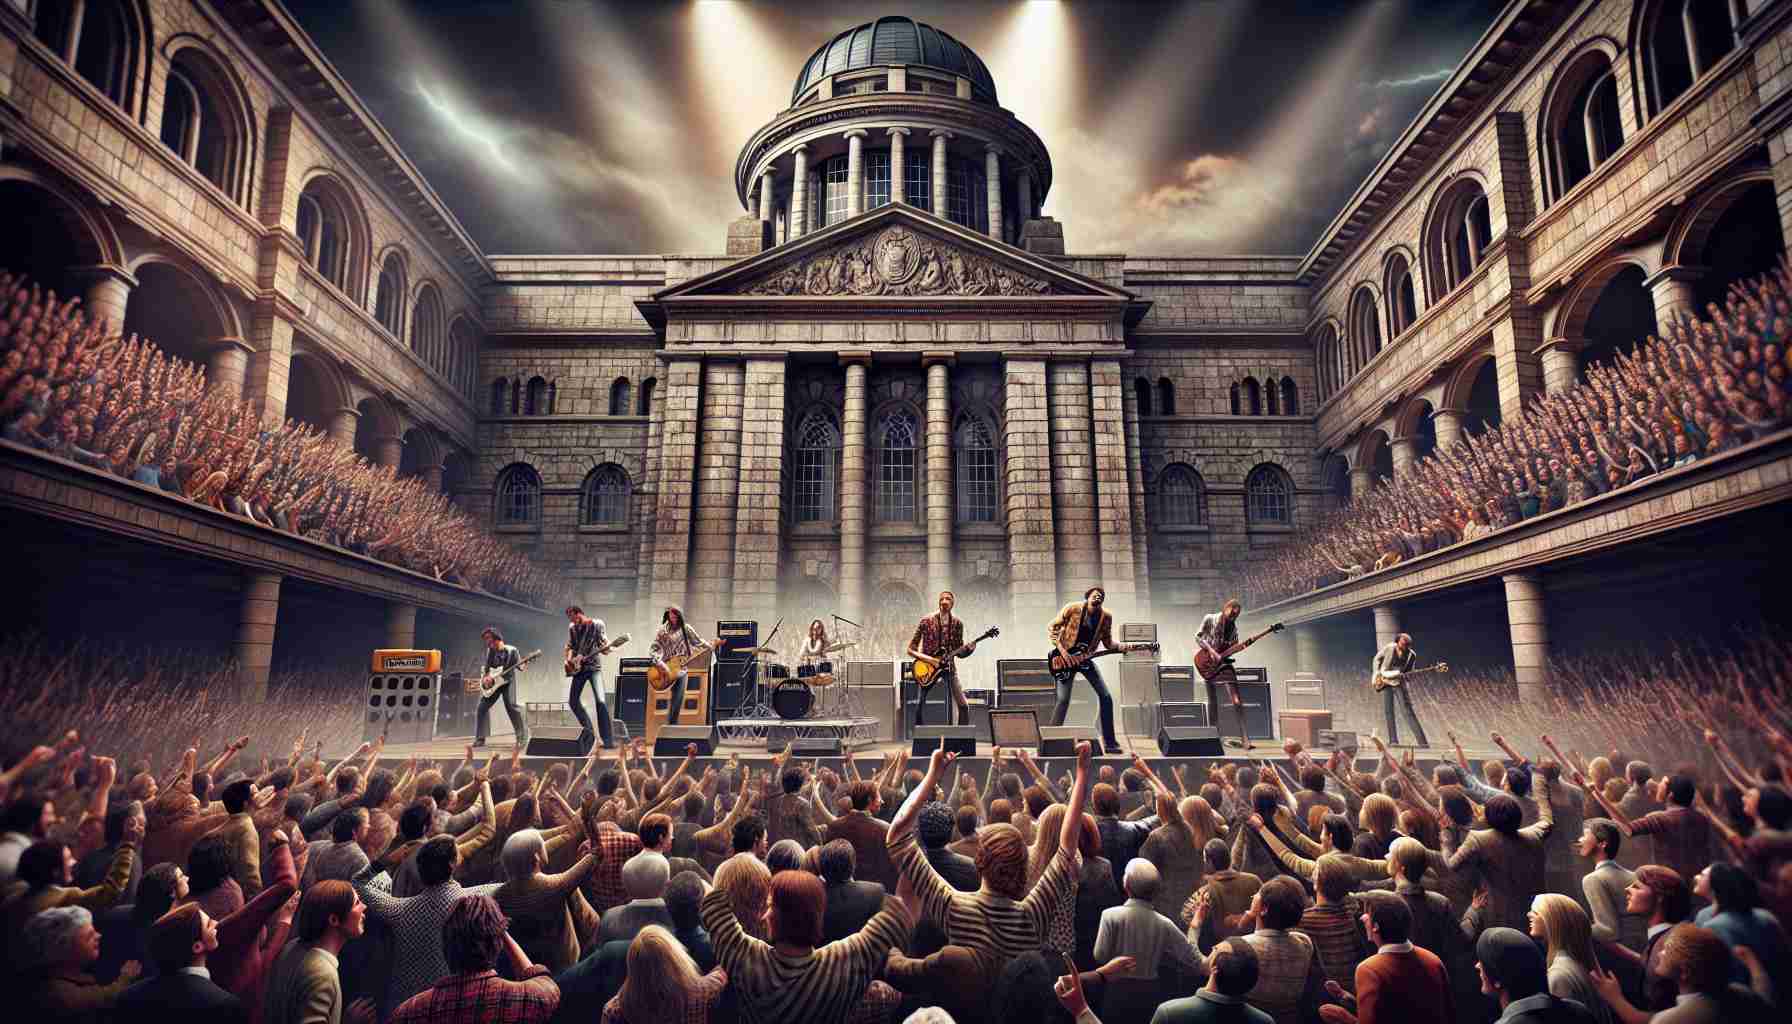 A realistic high-definition image capturing the pulsating excitement of a Rock 'n' Roll Extravaganza being held at a grand courthouse. The stone architecture of the courthouse serves as a historical backdrop to an ensemble of passionate musicians on stage, their electric guitars creating a symphony of rock music. The crowd, composed of diverse gender and races such as Caucasian, Hispanic, Black, Middle-Eastern, South Asian individuals, are swaying in rhythm to the pulsing beats, the lights from the stage reflecting off their faces creating a mesmerizing haze of colors. The energy and the spirit of rock music echoes through the grandeur of the courthouse.